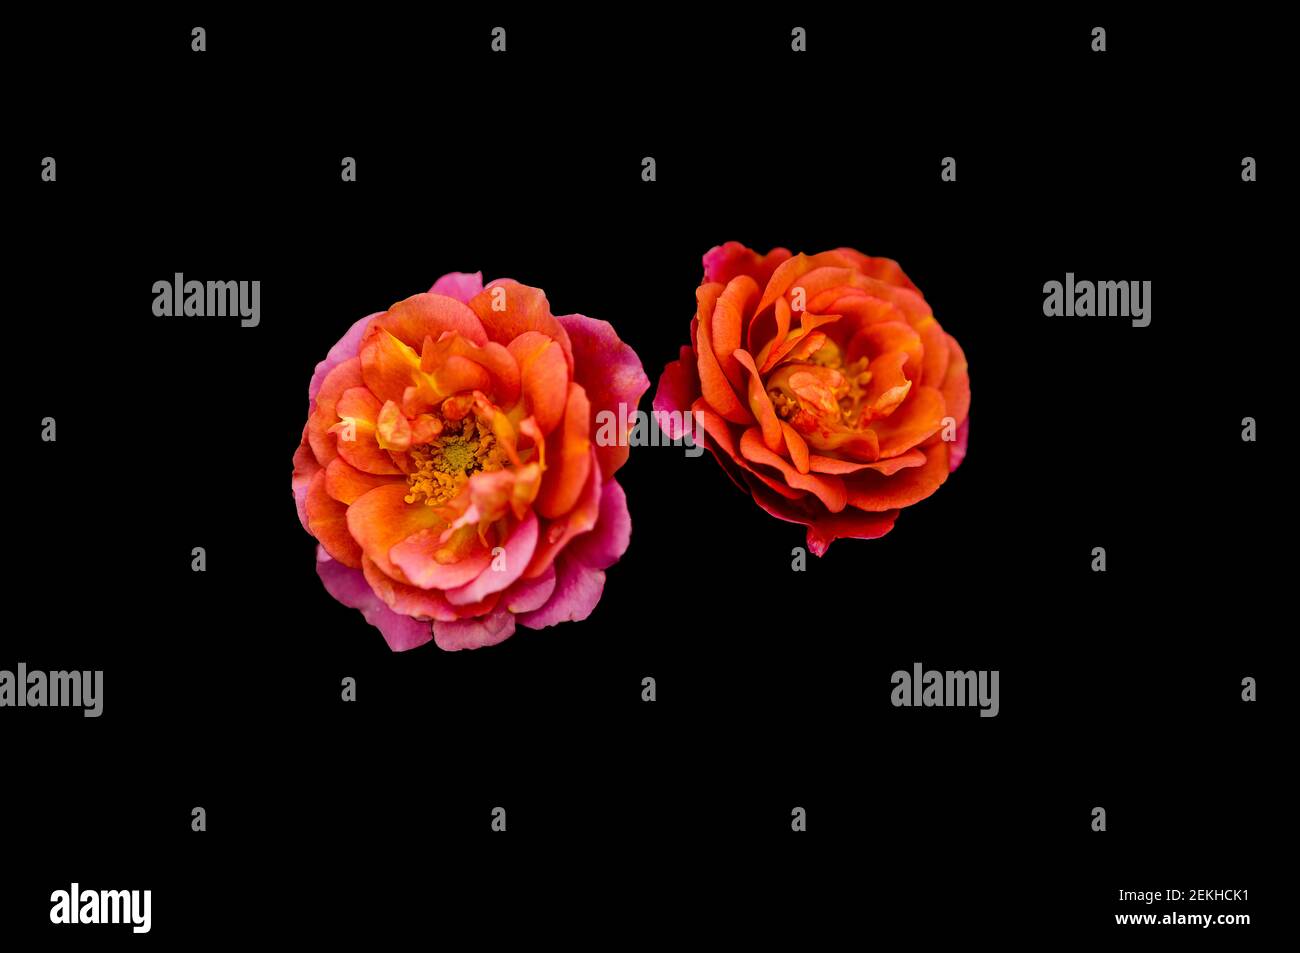 Orange and pink rose flower heads in black background Stock Photo